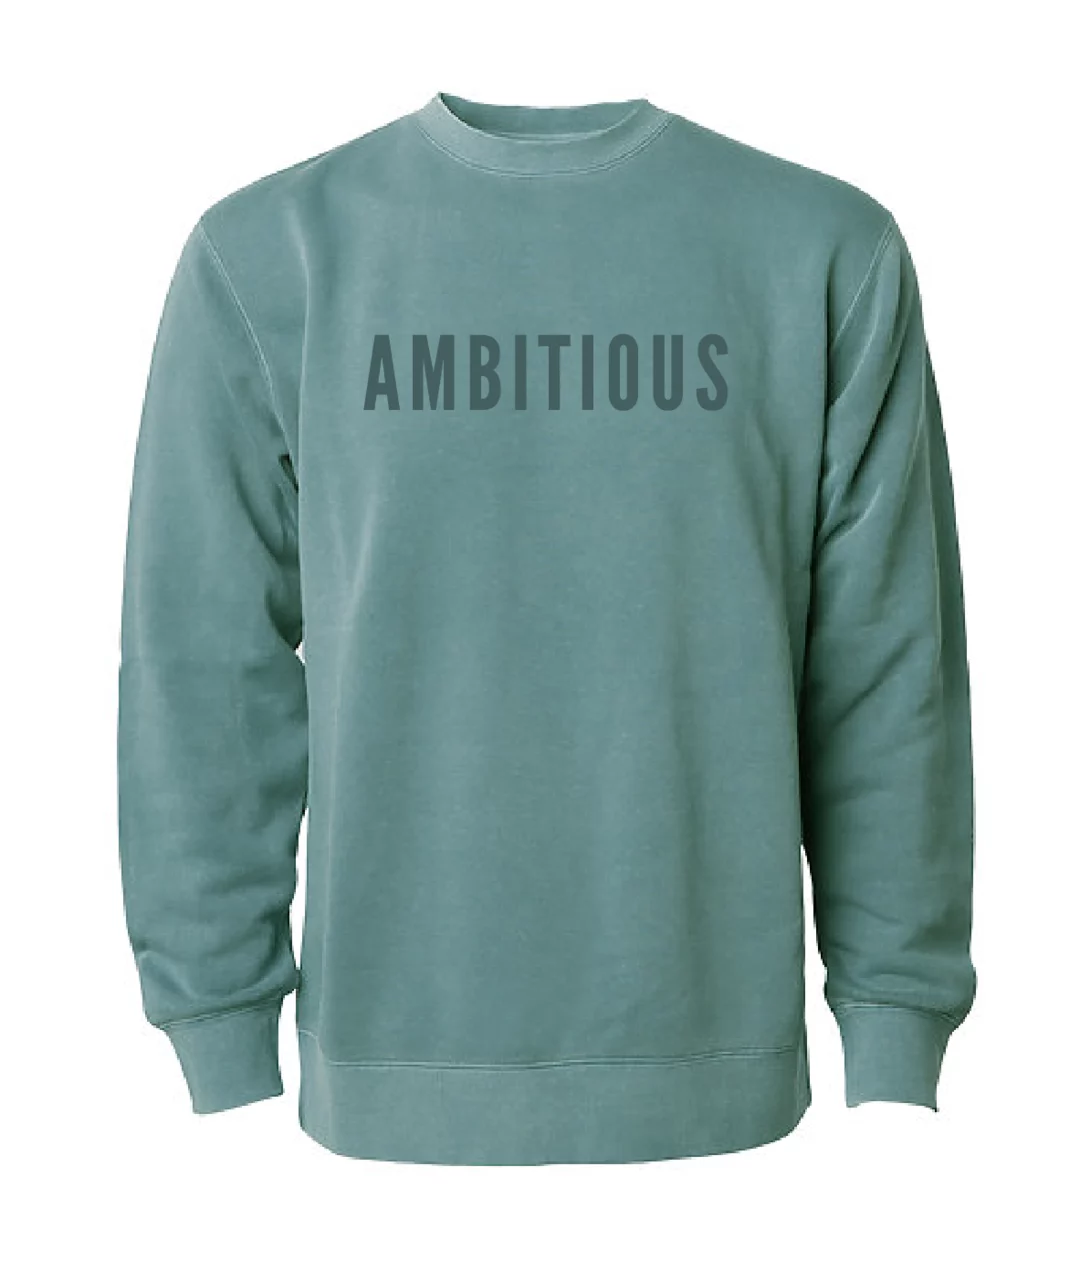 ambitious sweater